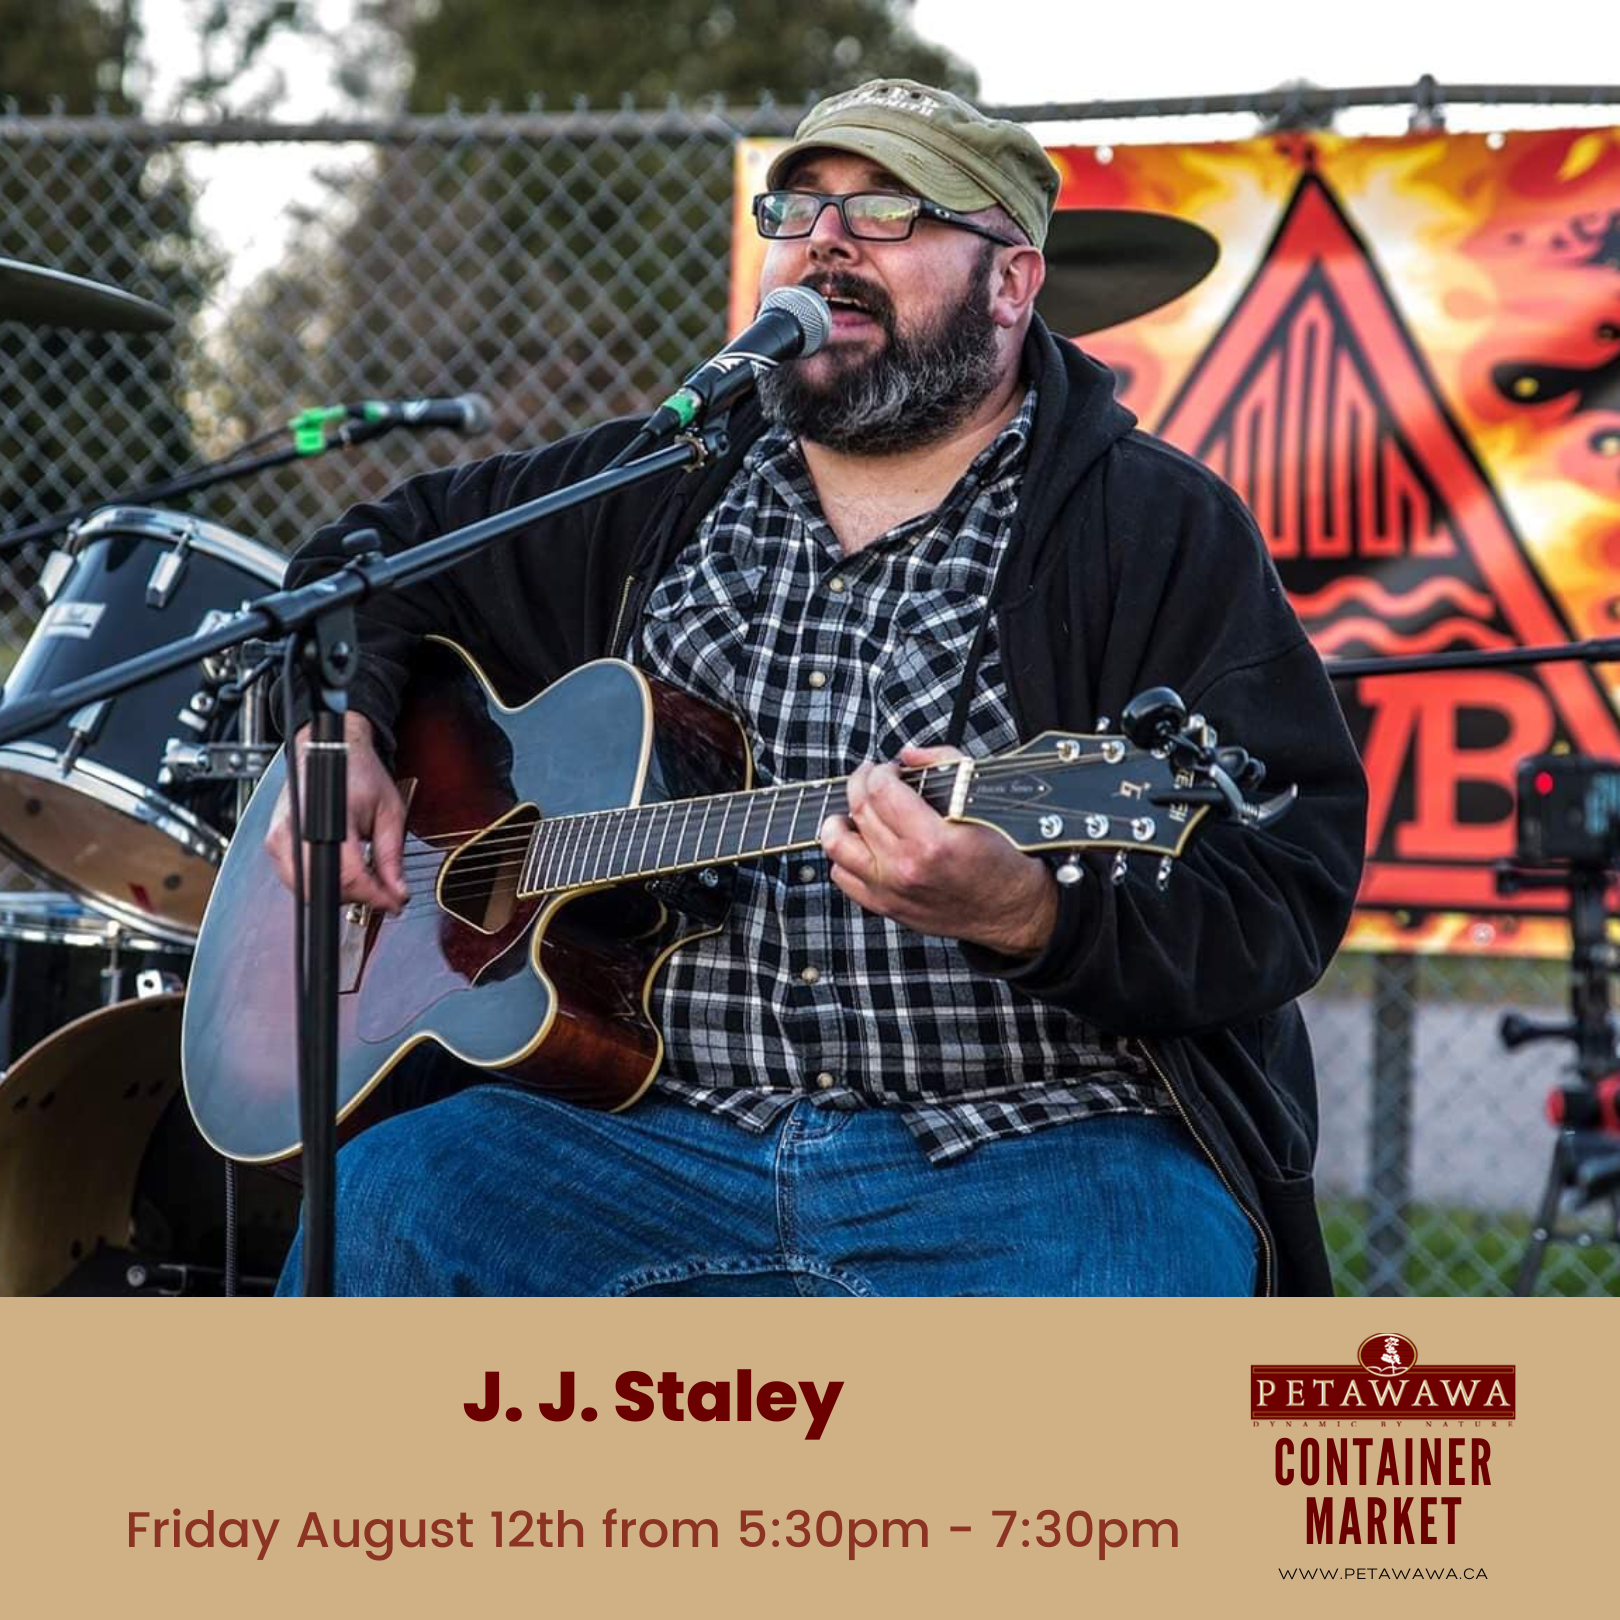 an image of J.J. Staley local musician